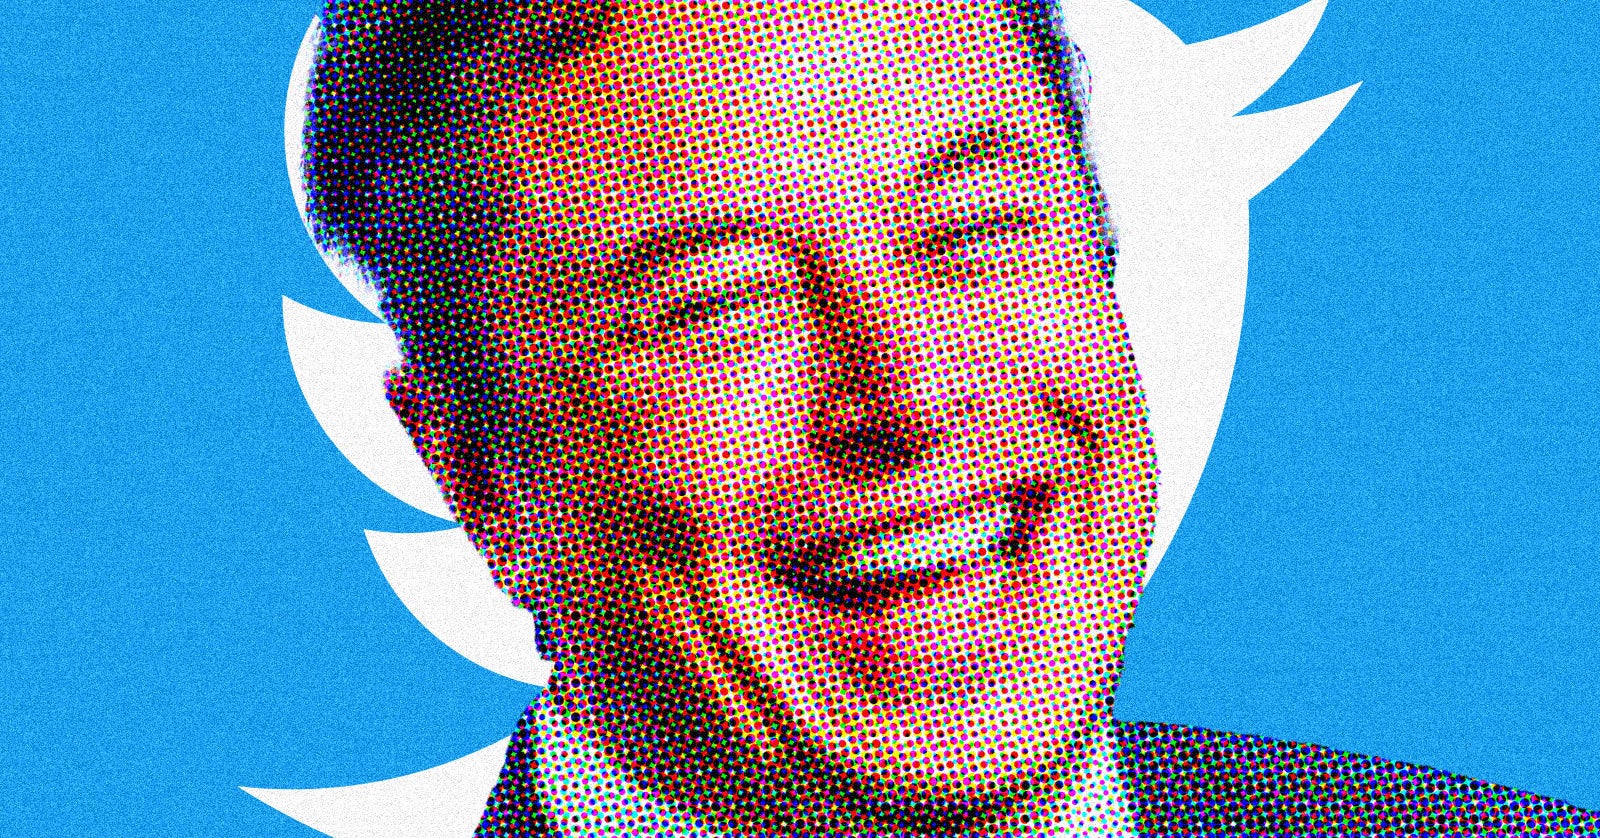 The Deal Is Done: Elon Musk Finally Owns Twitter